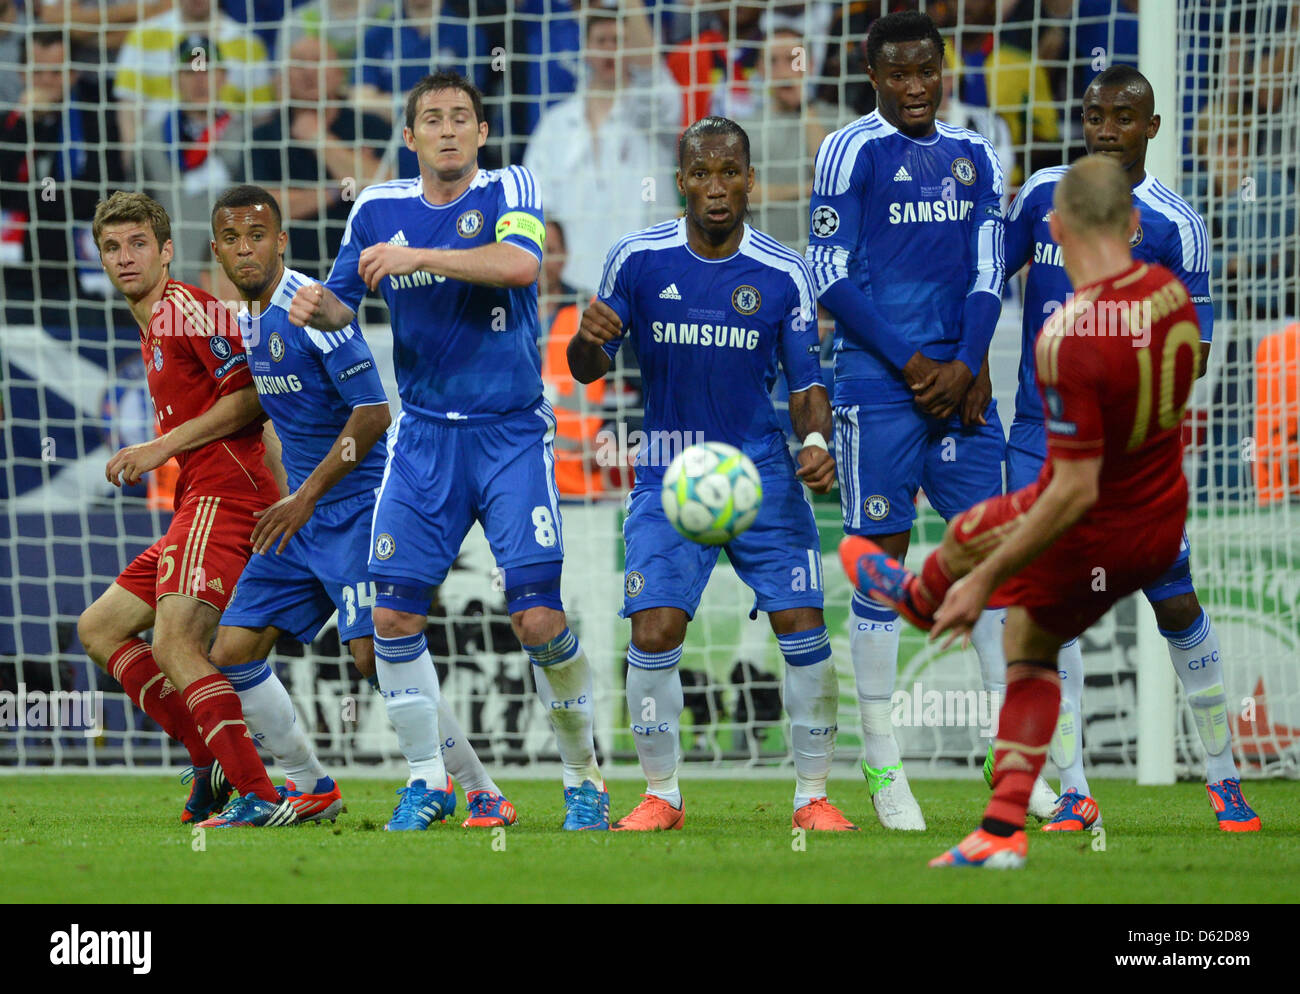 Munich's Thomas Mueller (L) and Ryan Bertrand, Frank Lampard, Didier Drogba, John Obi Mikel Mikel and Salomon Kalou watch as Munich's Arjen Robben (R) takes a free kick during the UEFA Champions League soccer final between FC Bayern Munich and FC Chelsea at Fußball Arena München in Munich, Germany, 19 May 2012. Photo: Marcus Brandt dpa/lby  +++(c) dpa - Bildfunk+++ Stock Photo